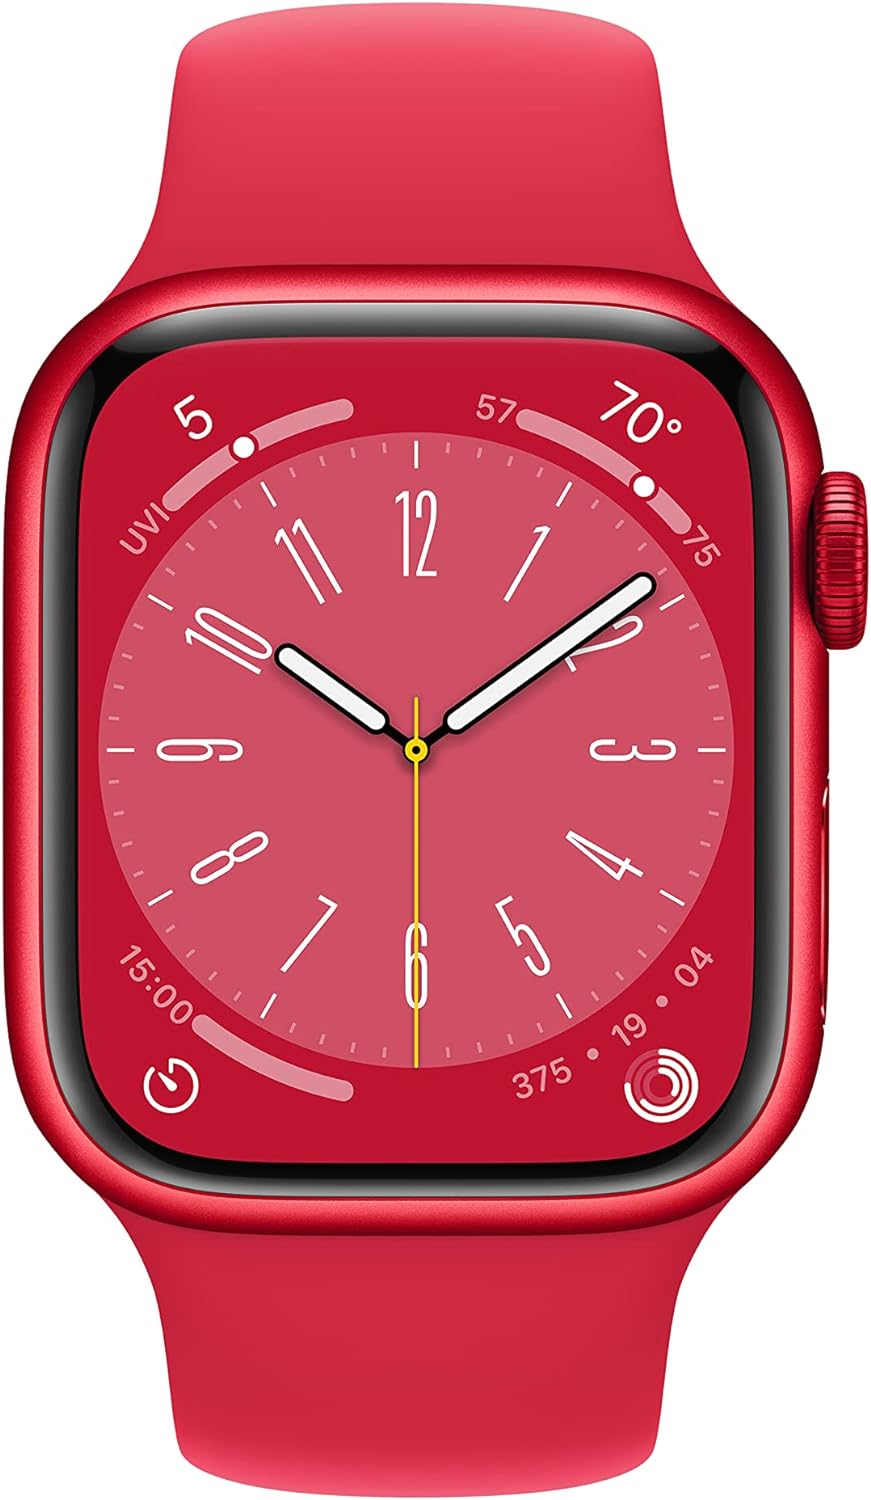 Modern (PRODUCT)RED Apple Watch - GPS, Heart Rate Monitor, Notifications 0194253150503